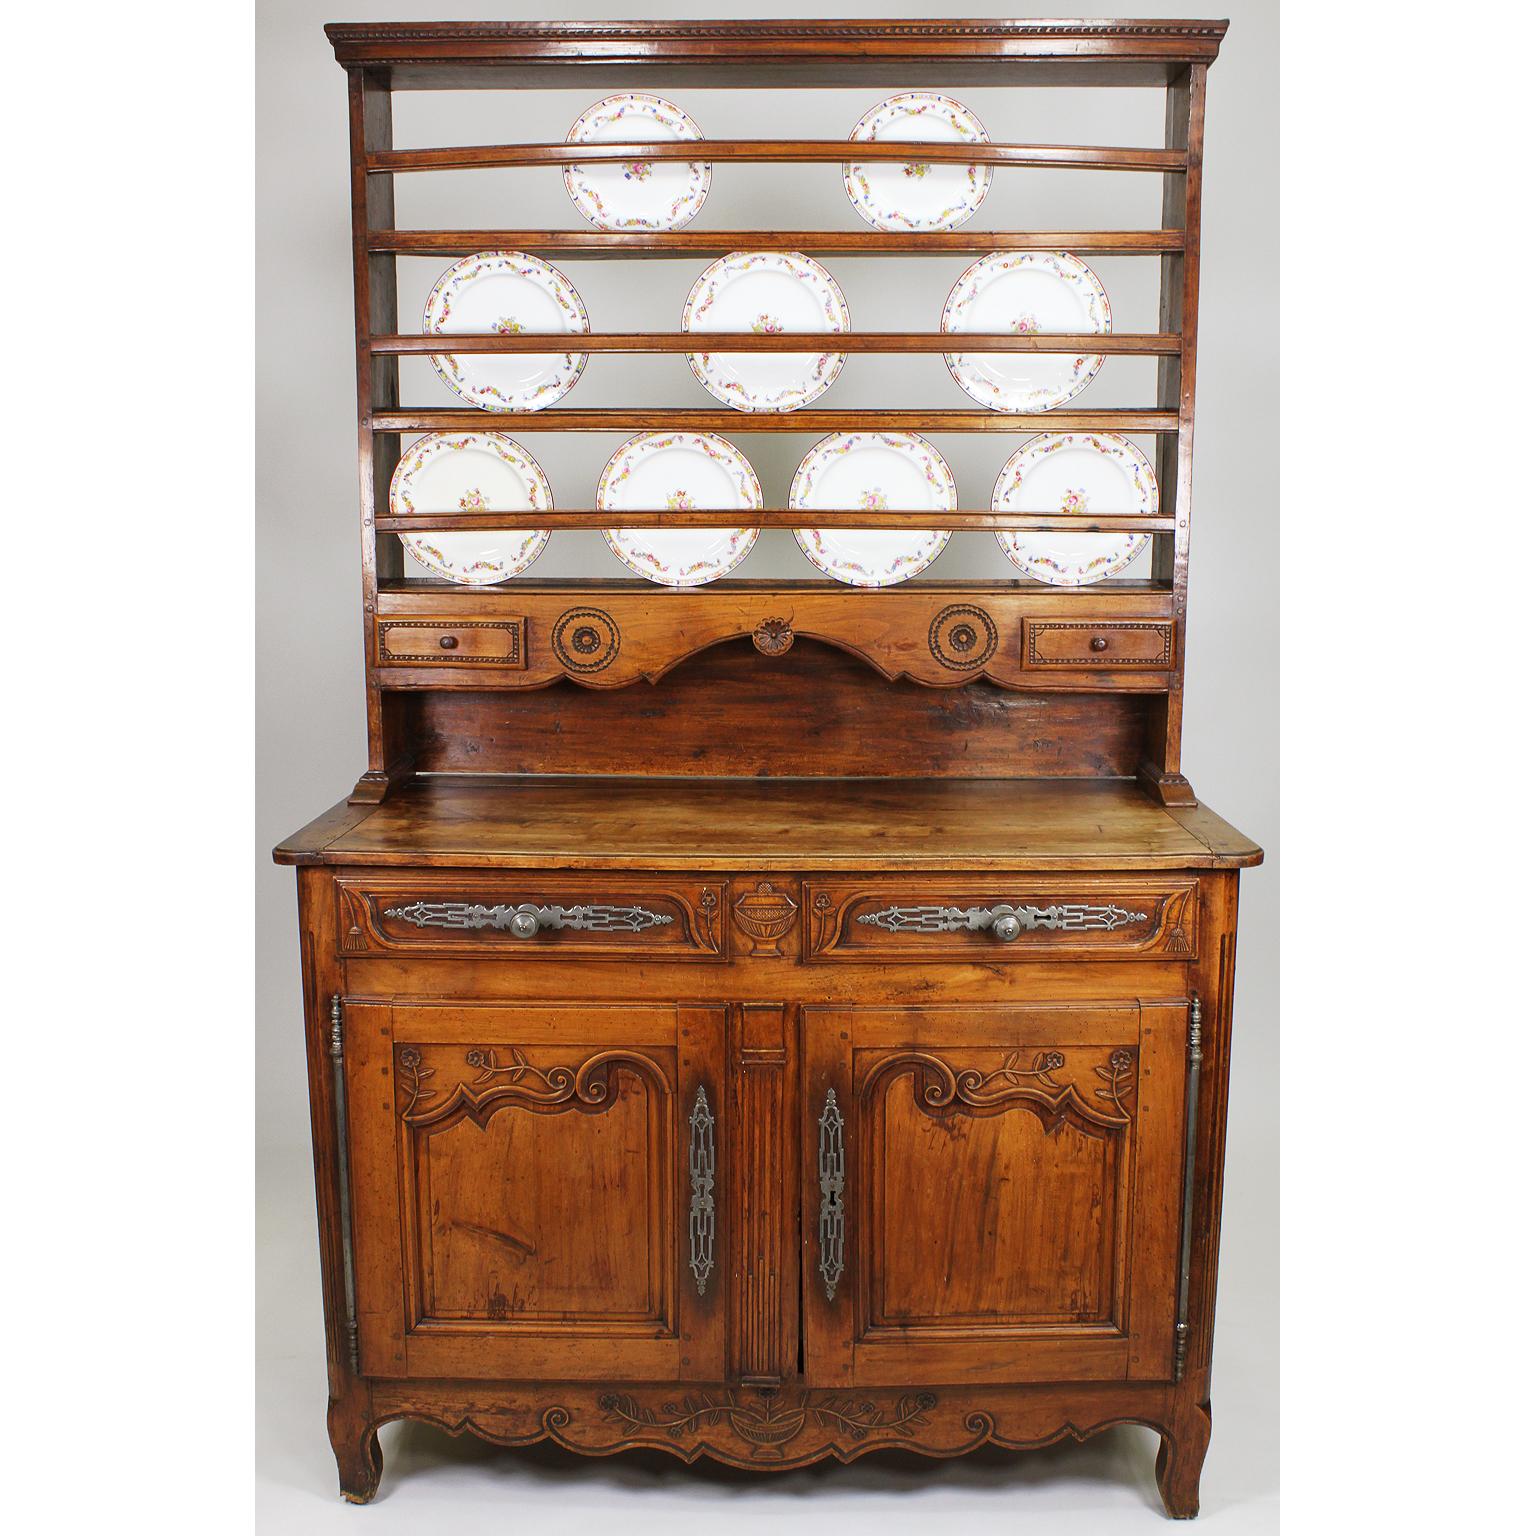 A French 18th-19th century Provincial Louis XV style carved walnut Vaisselier hutch buffet. The rectangular body with twin apron drawers with hammered silvered-metal hardware, centered with a carved urn above a pair of cupboard doors with fiche